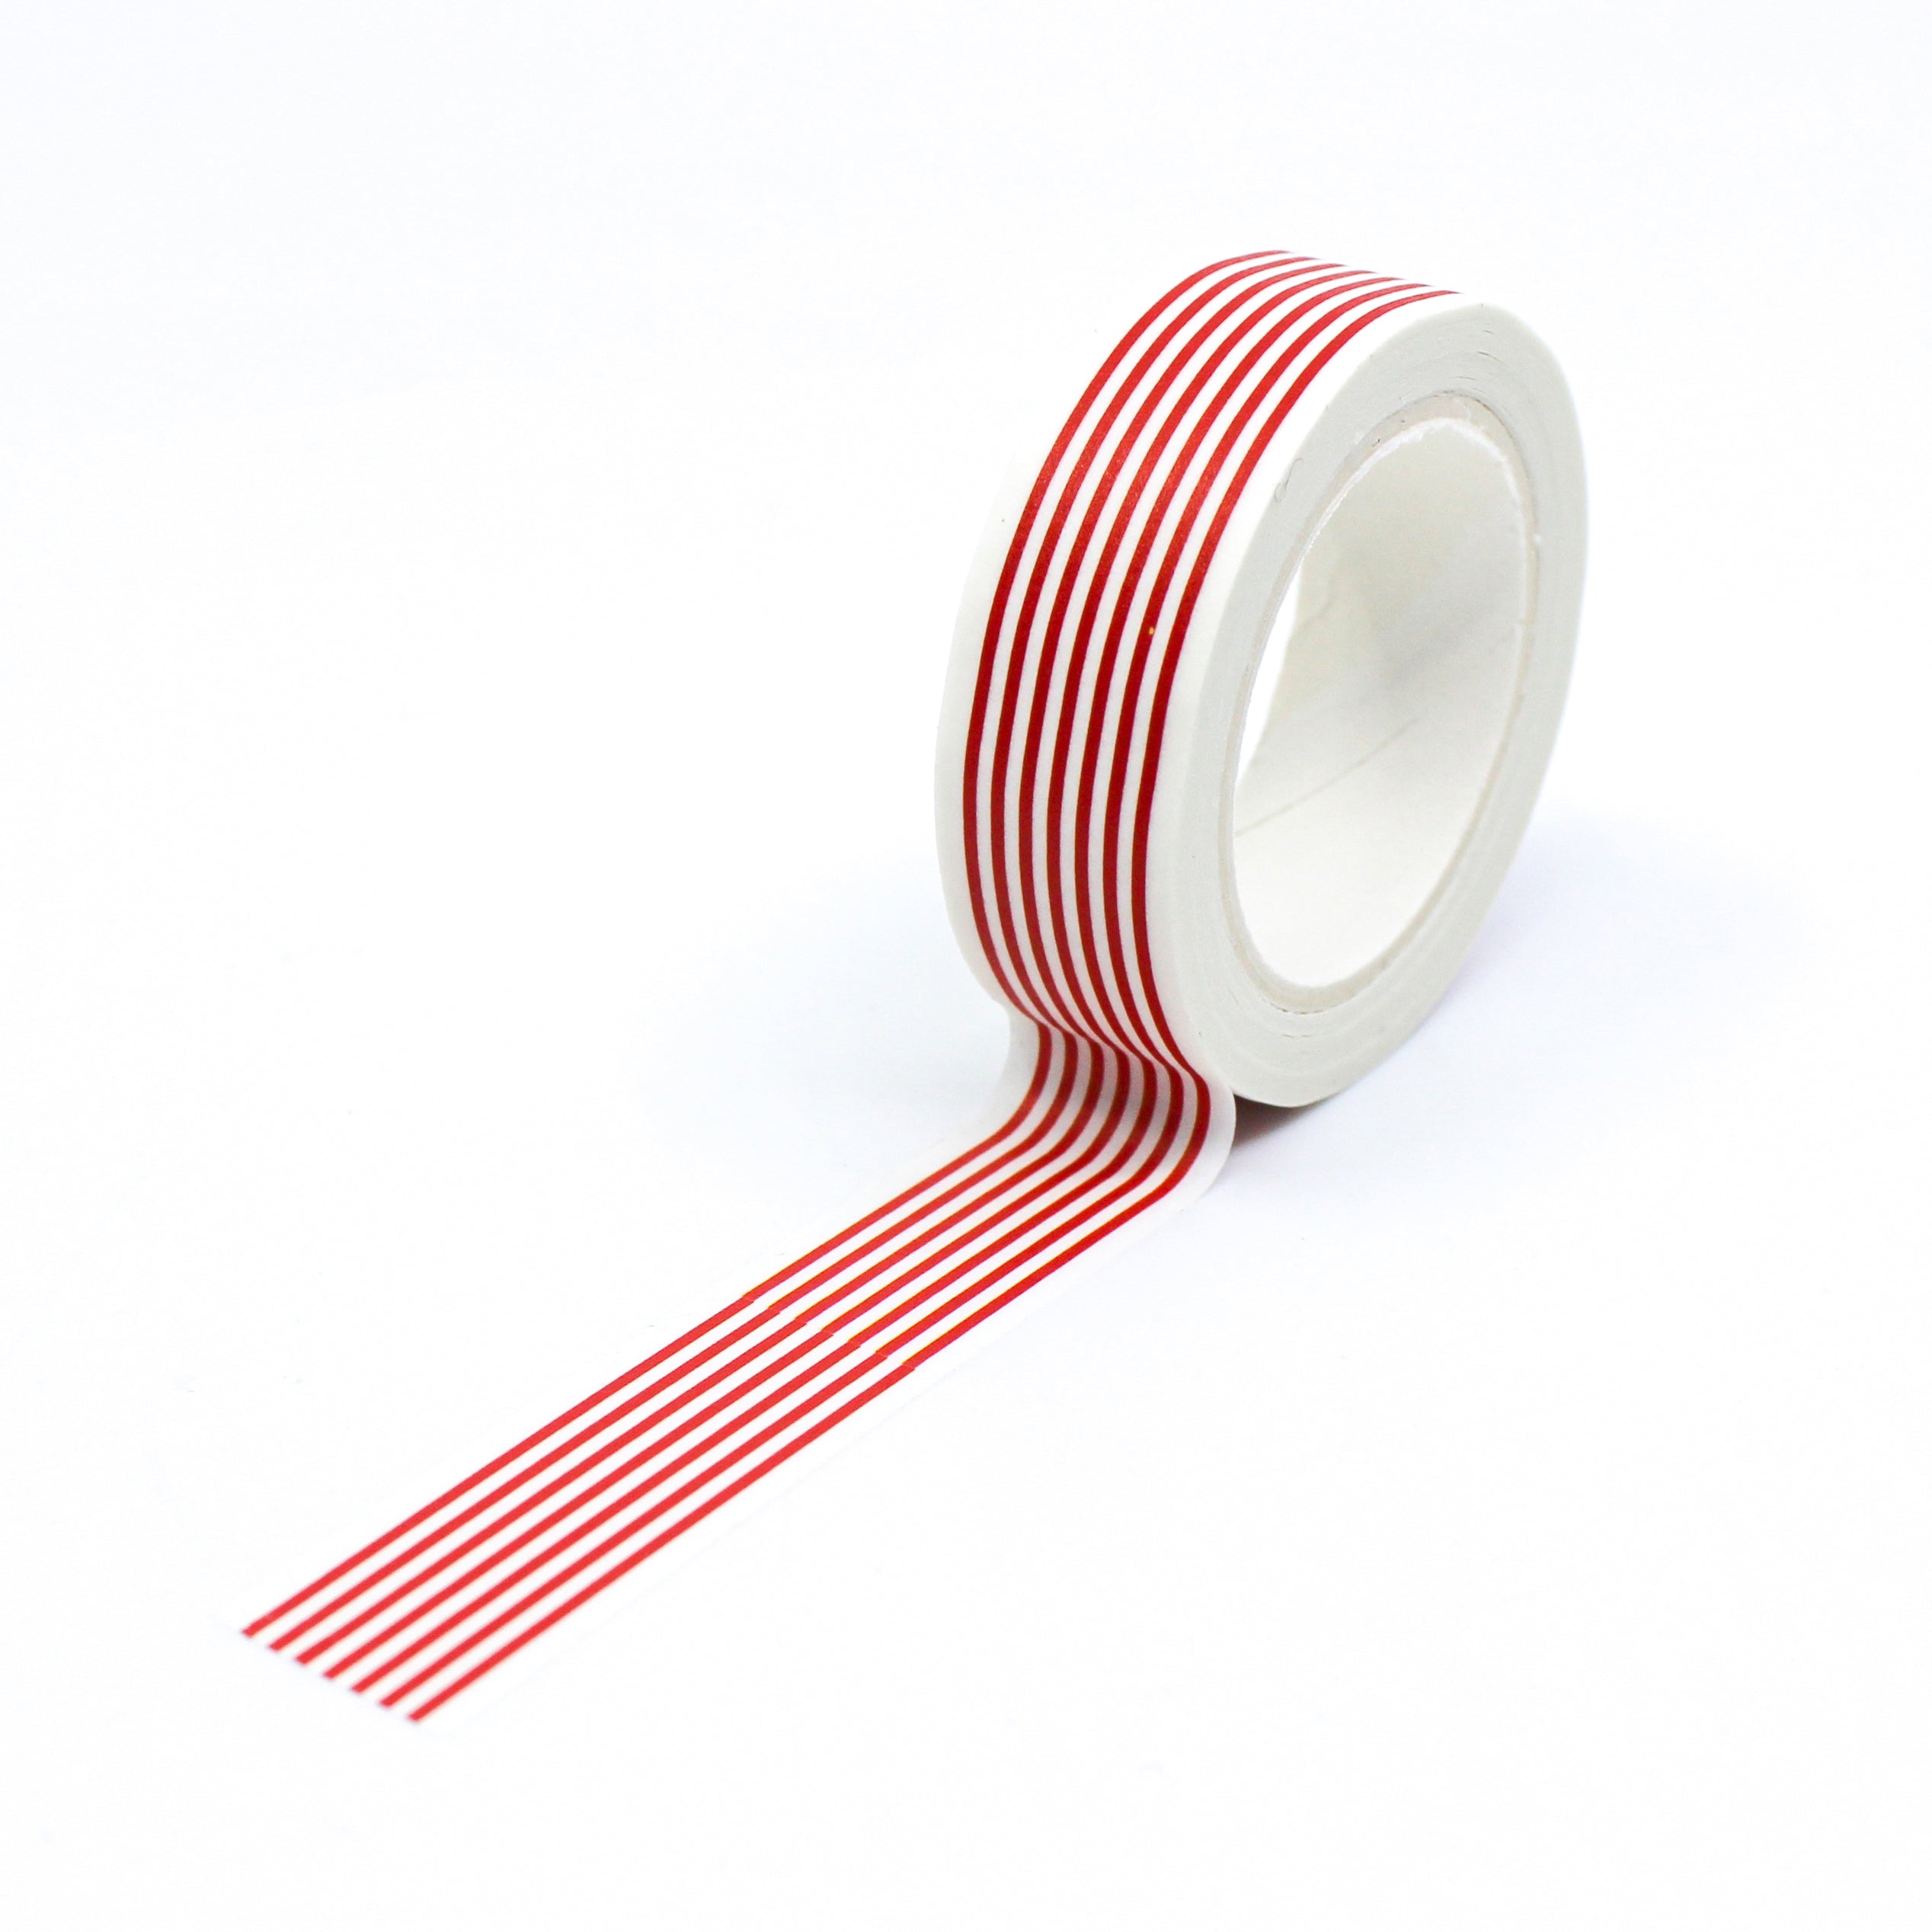 This is the full pattern repeat of our red thin stripes washi tape from BBB Supplies Craft Shop.